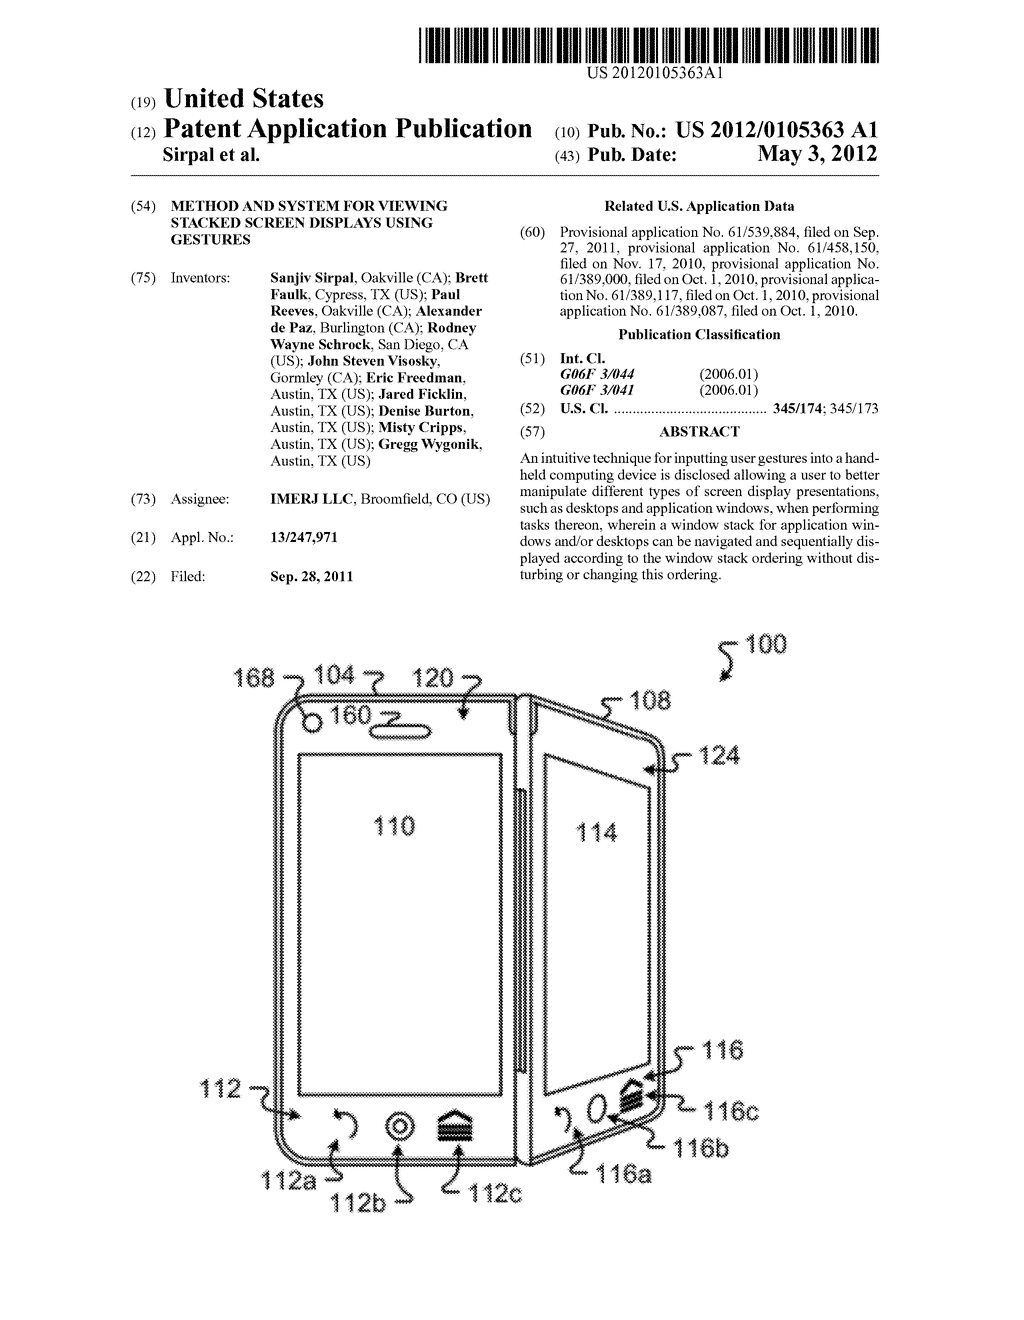 METHOD AND SYSTEM FOR VIEWING STACKED SCREEN DISPLAYS USING GESTURES - diagram, schematic, and image 01